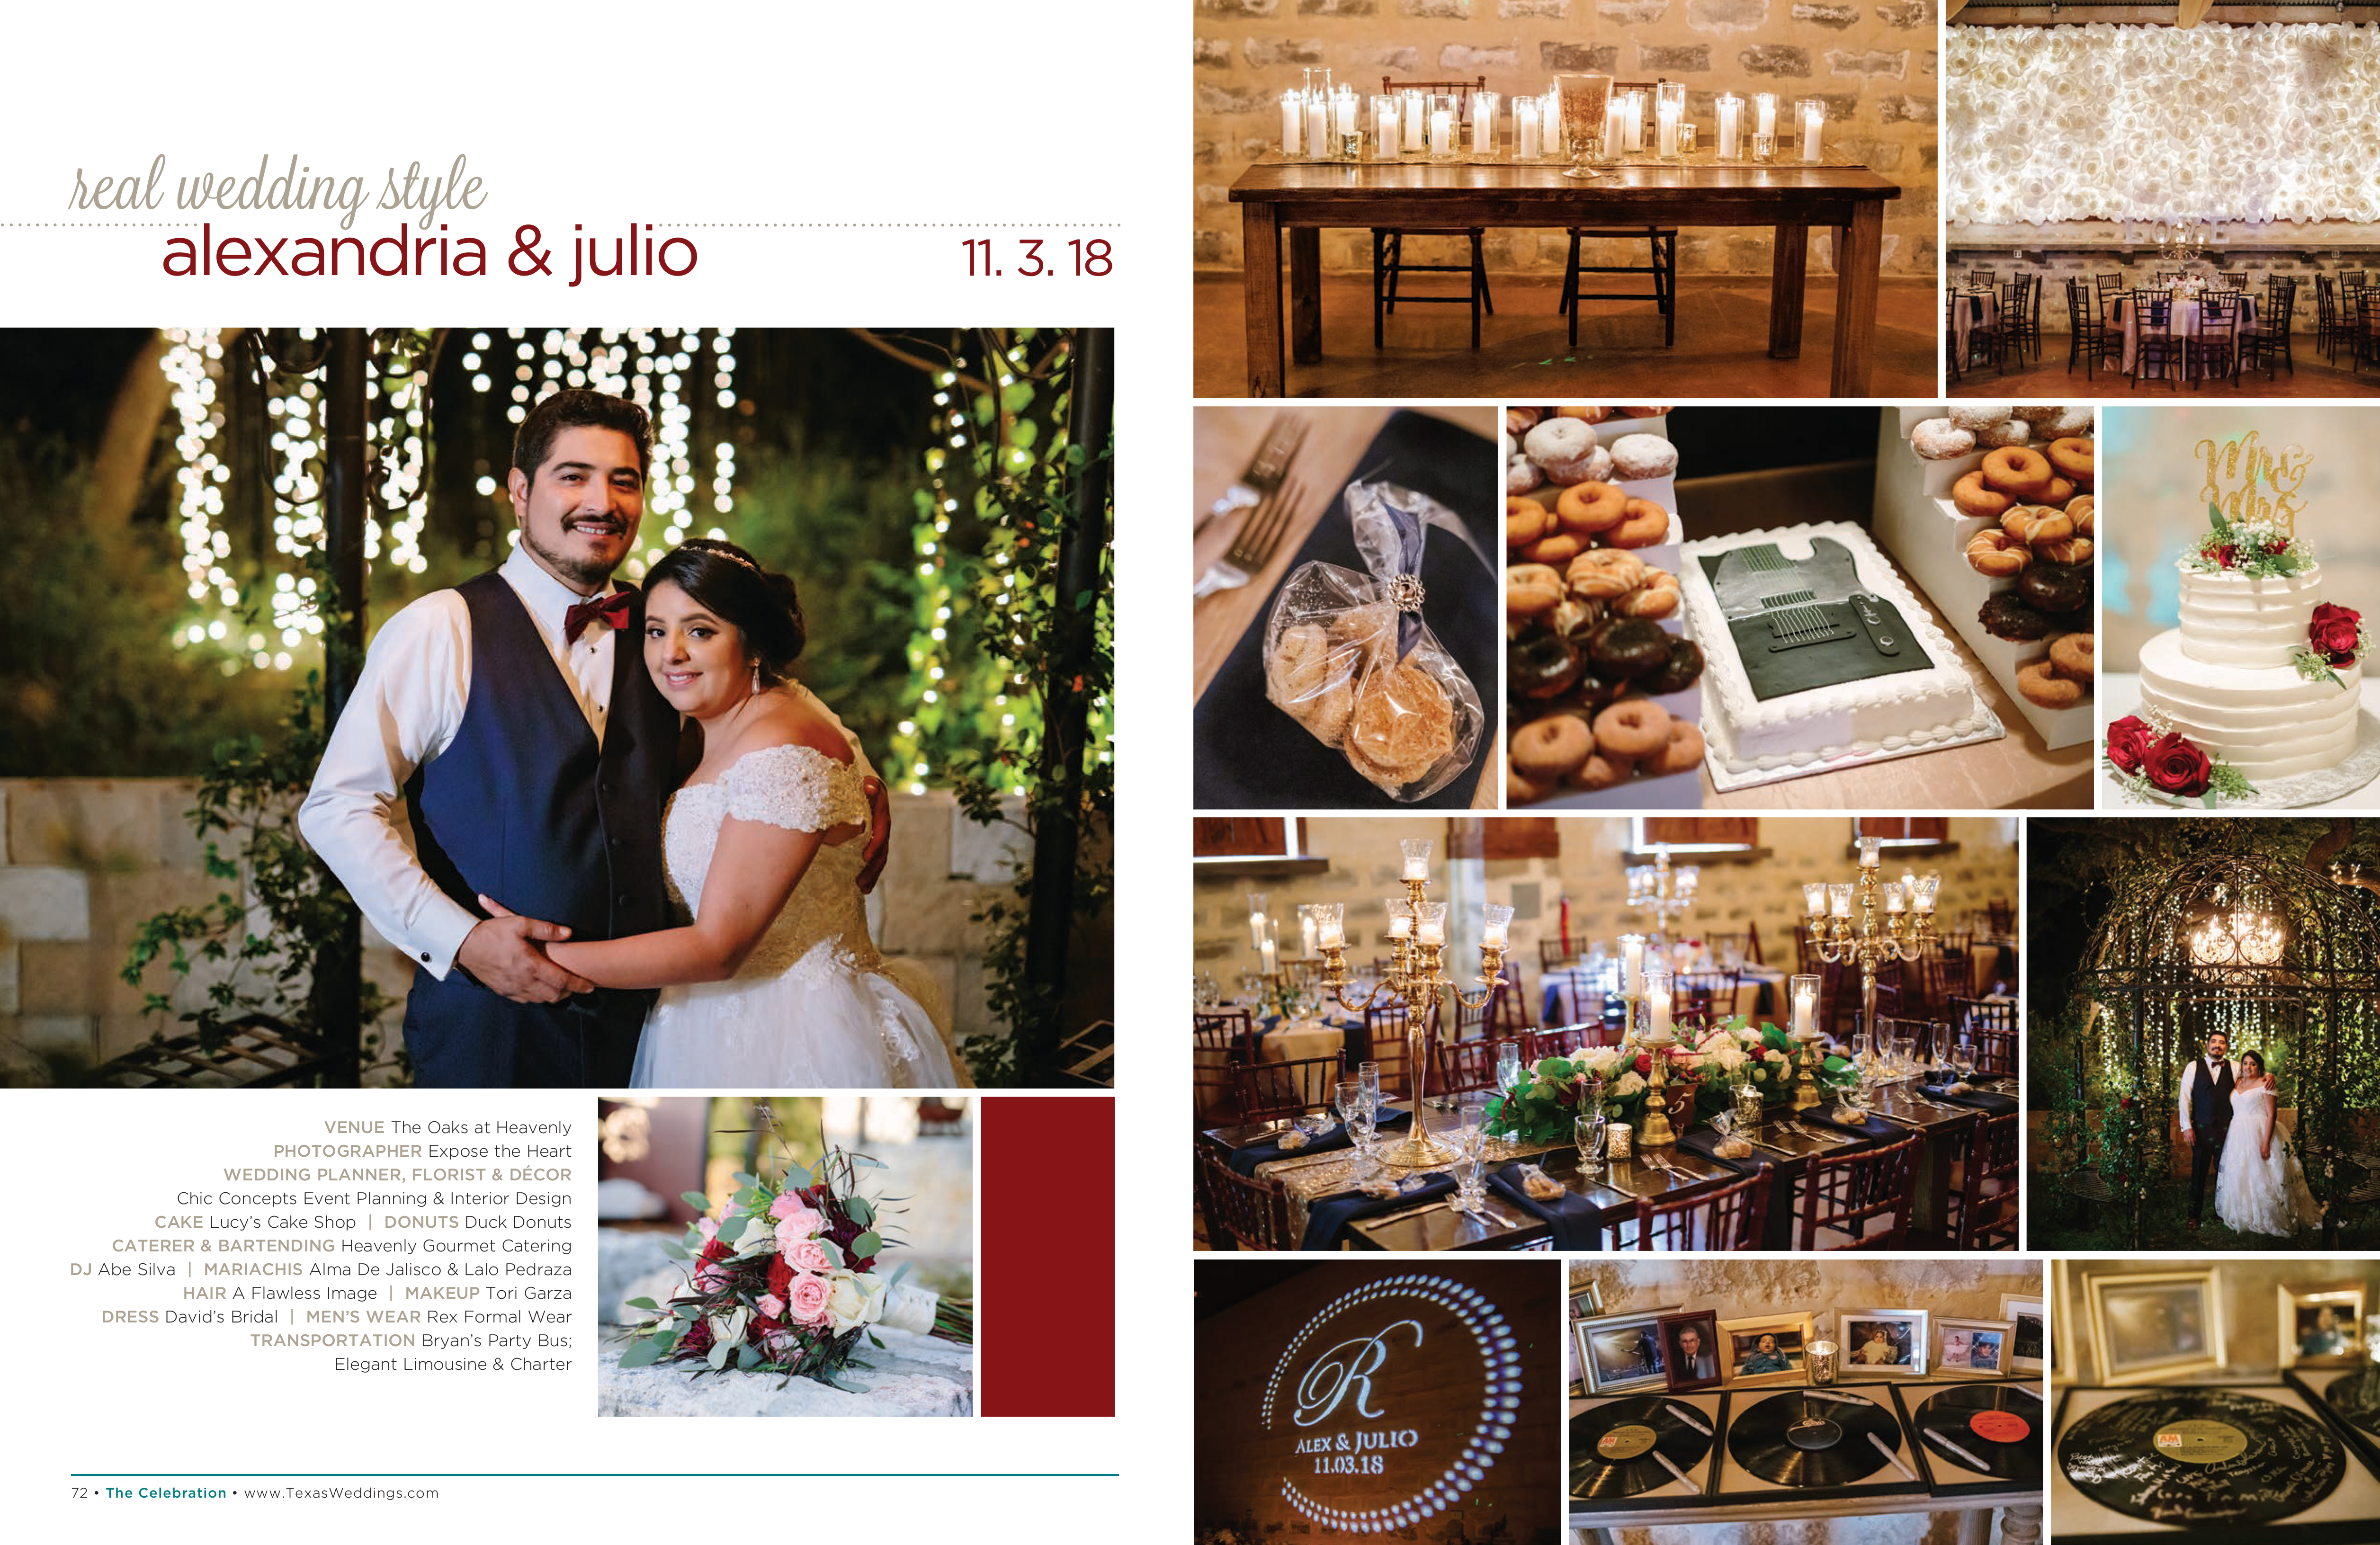 Alexandria & Julio in their Real Wedding Page in the Fall/Winter 2019 Texas Wedding Guide